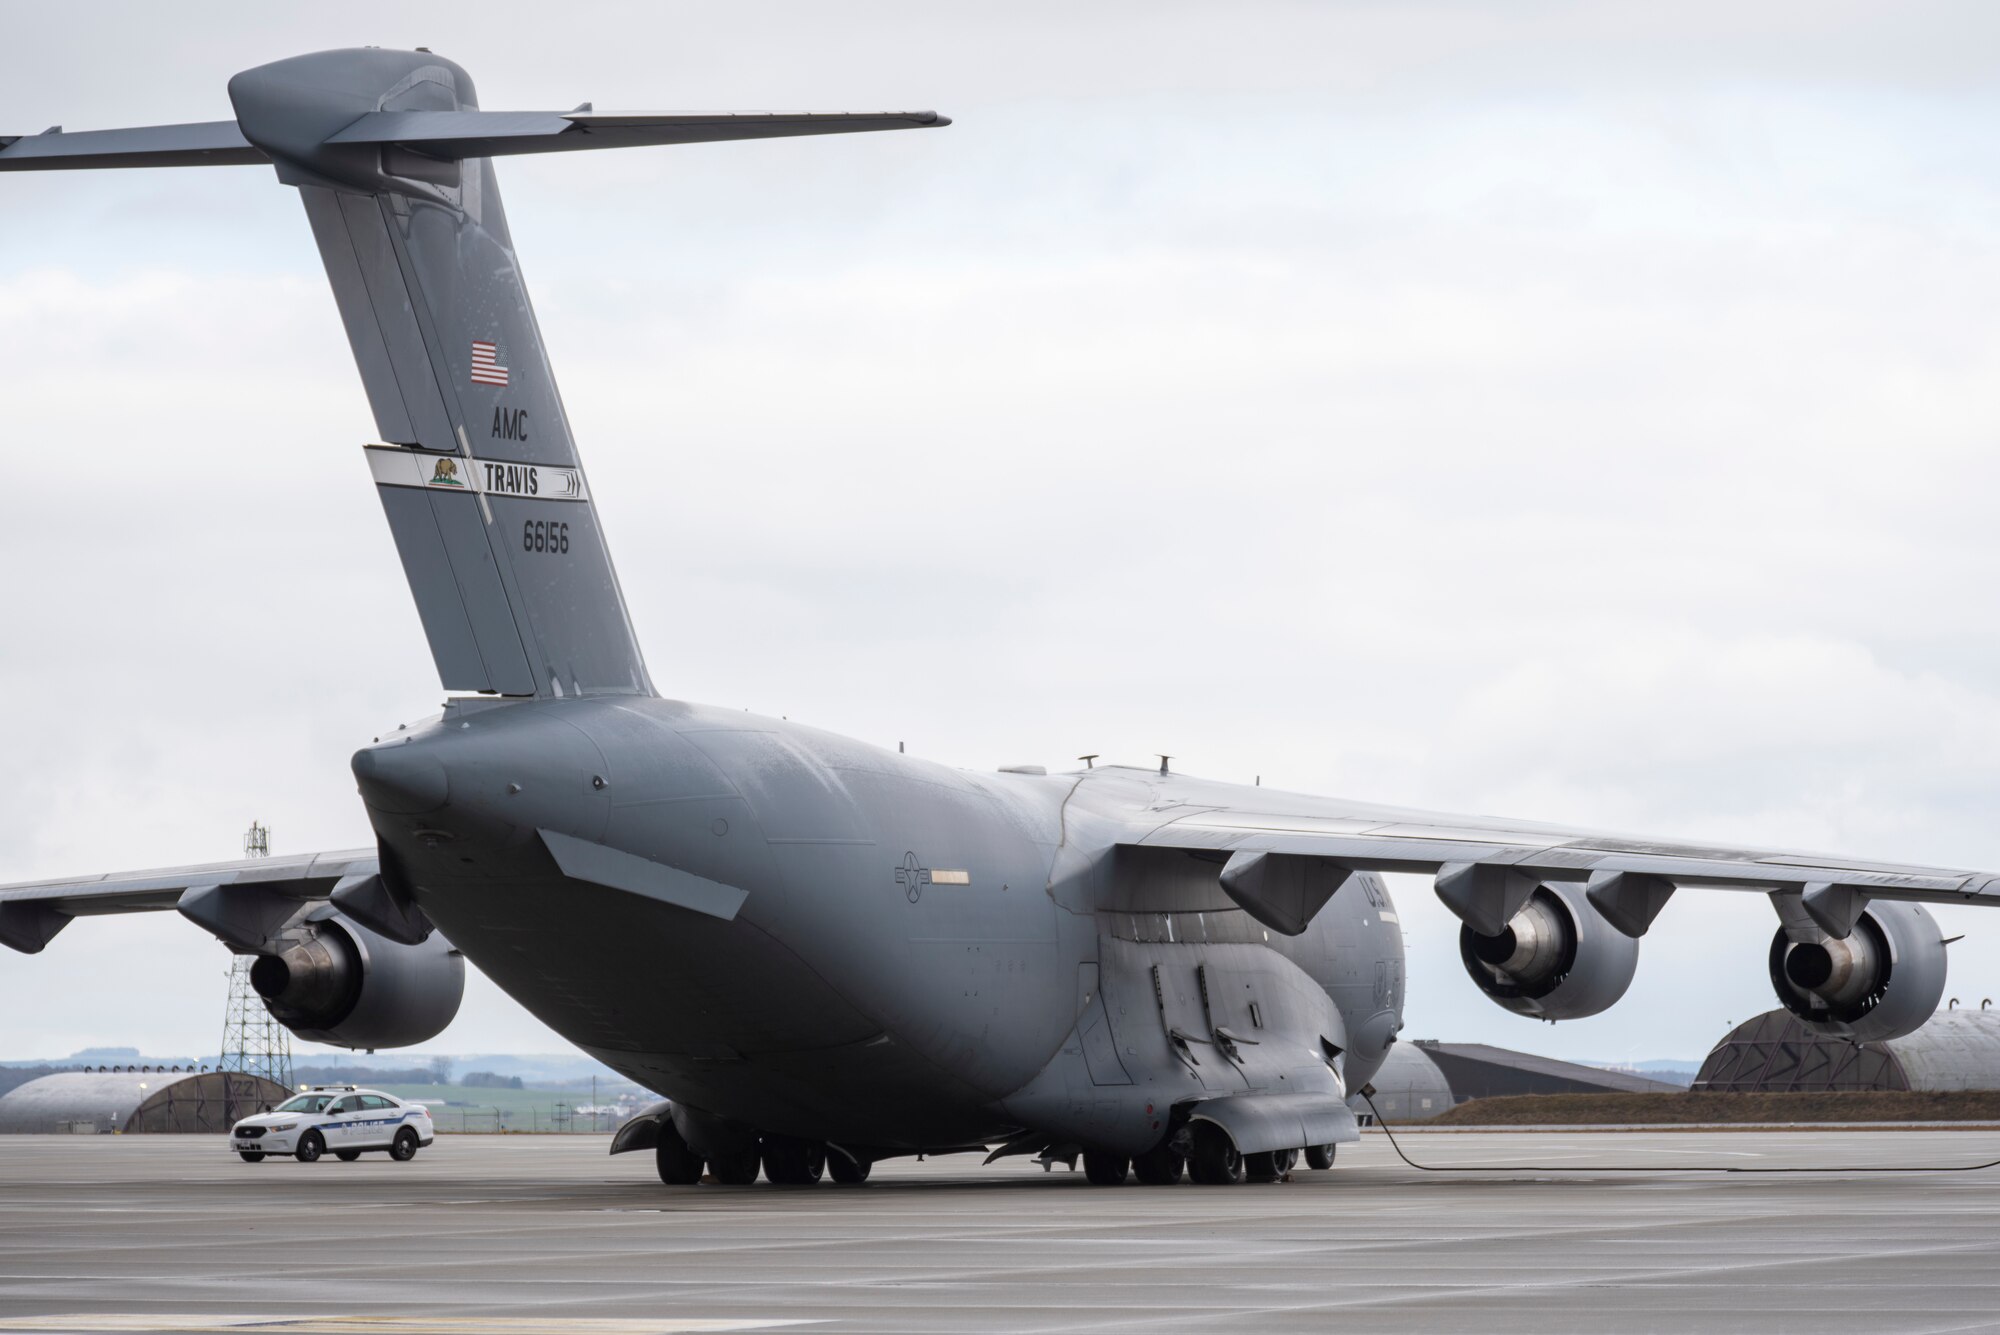 Airmen from the 726th Air Mobility squadron unload cargo from a C-17 Globemaster III aircraft.